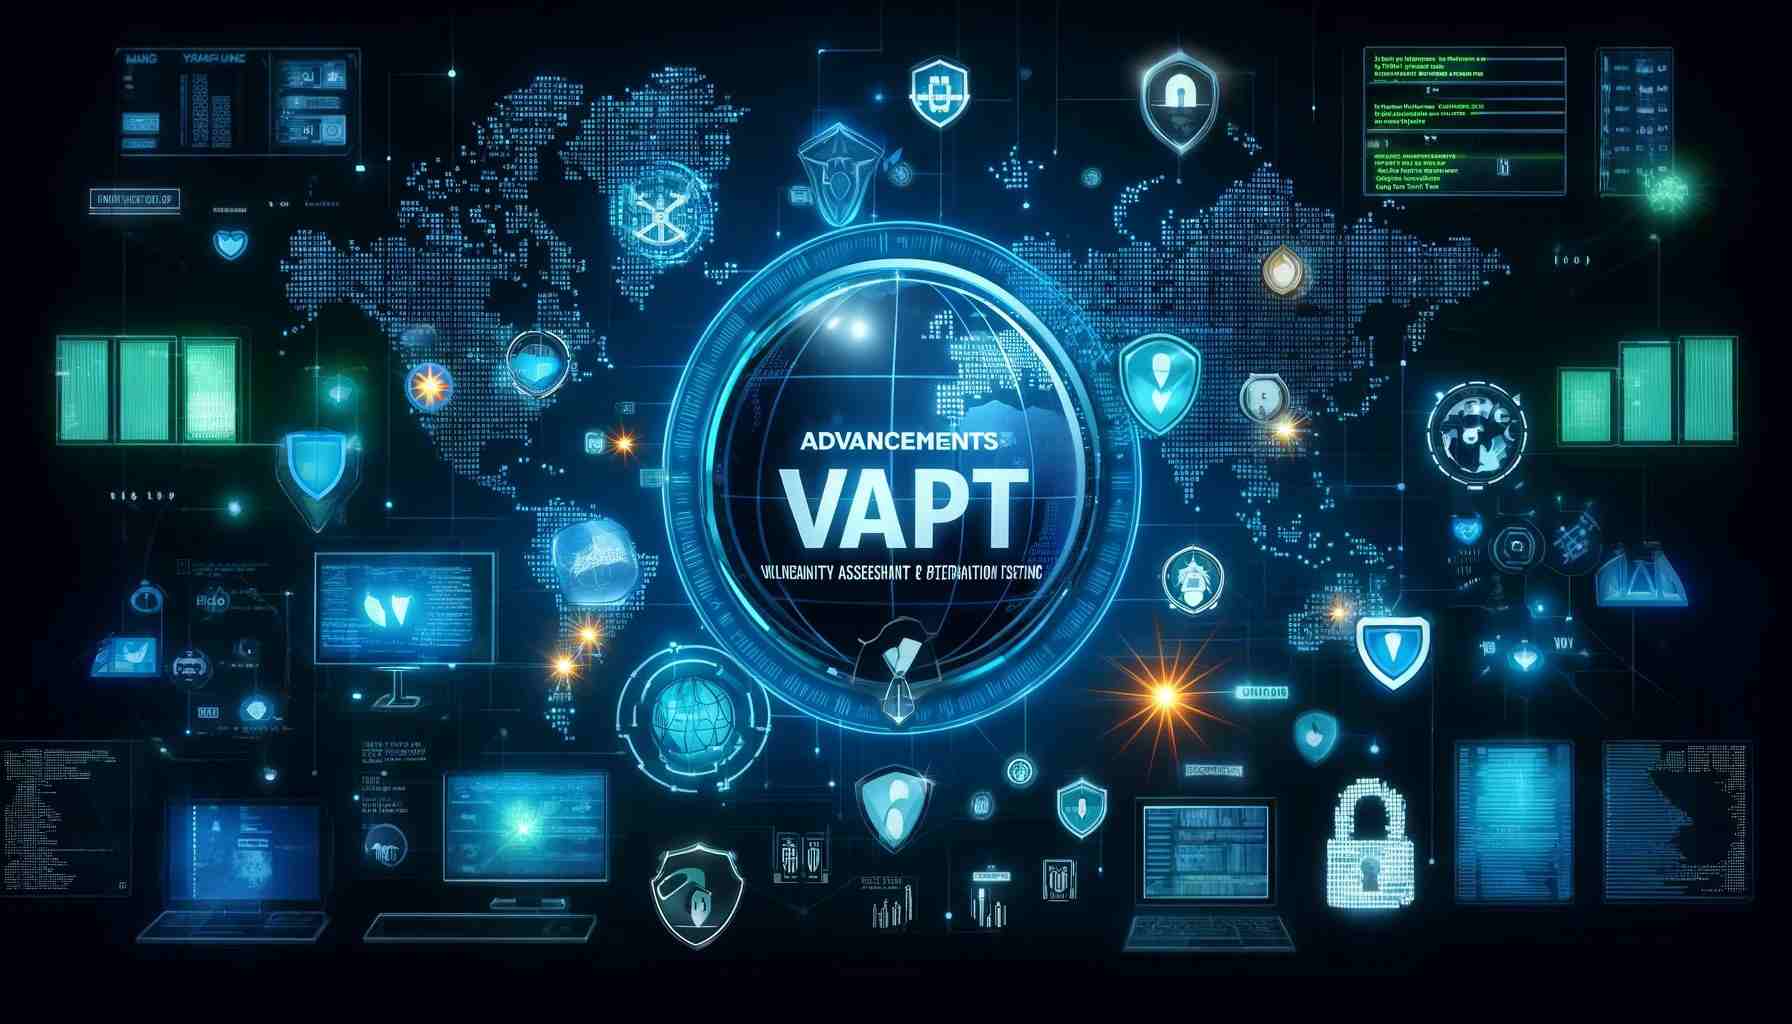 Advancements in VAPT Testing